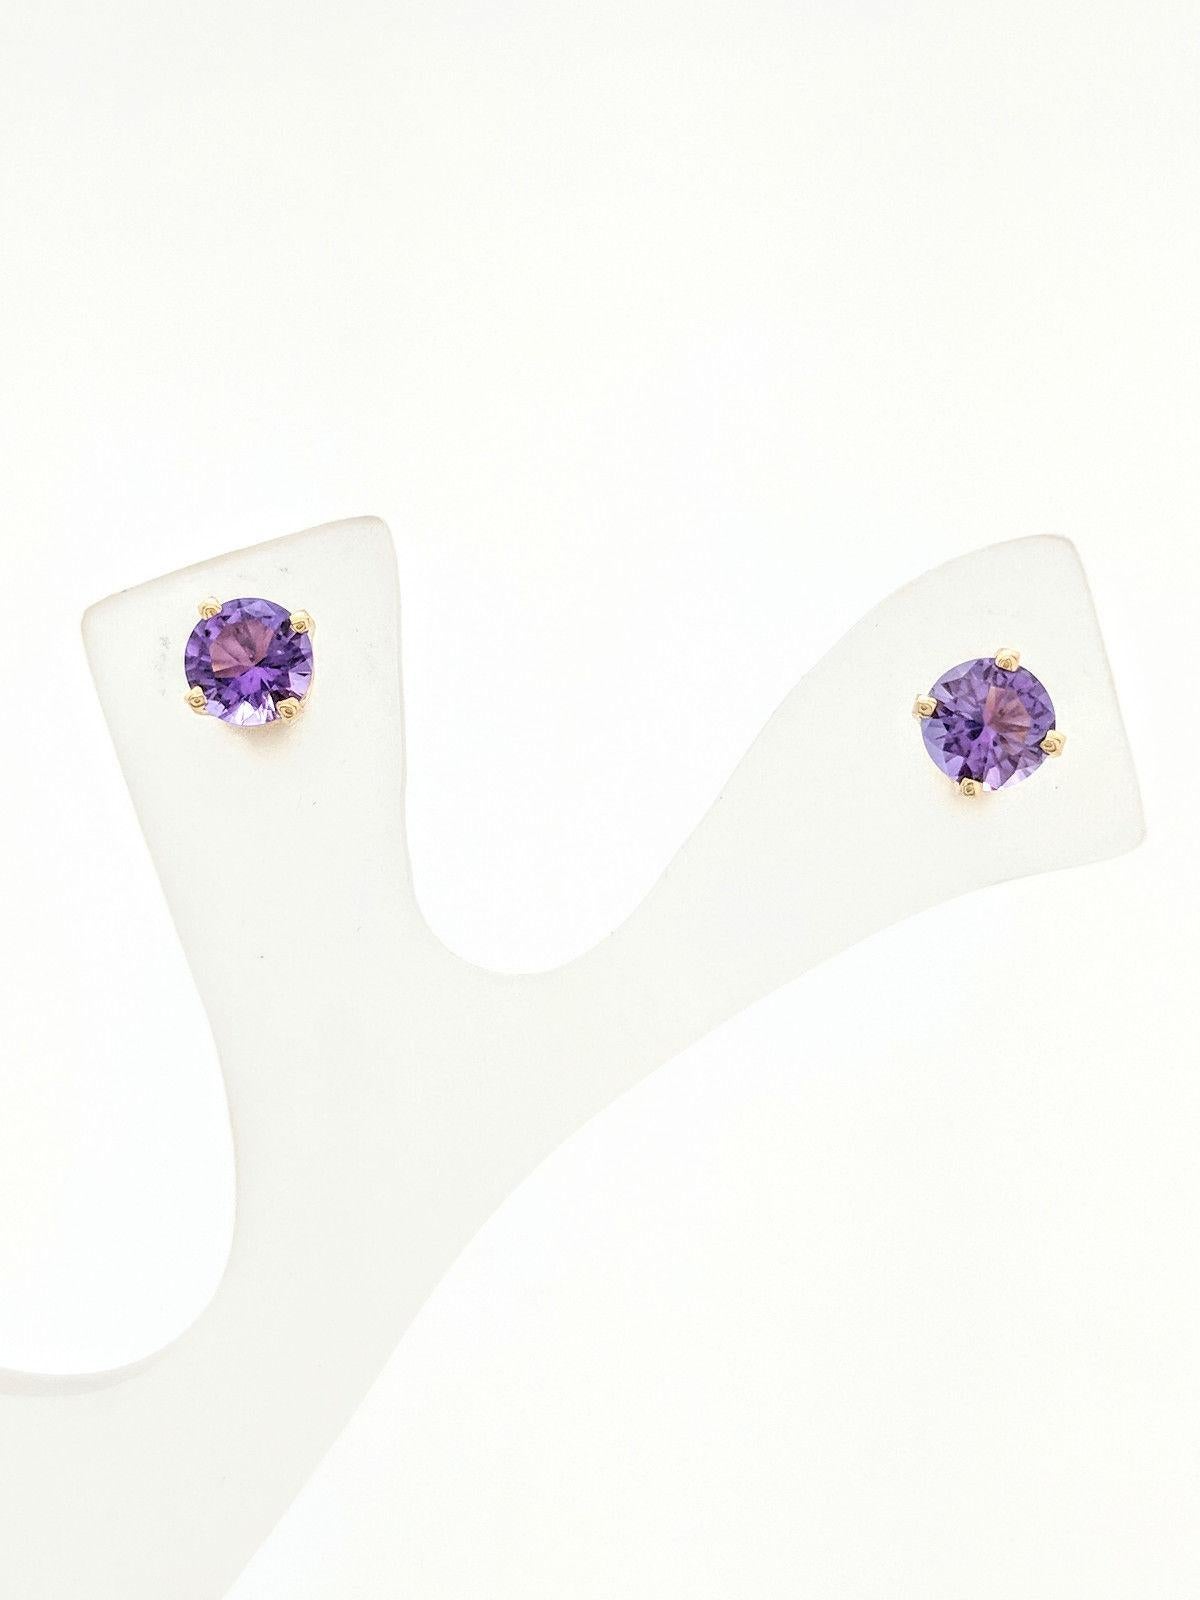 You are viewing a beautiful pair of amethyst stud earrings. These earrings are crafted from 14k yellow gold and weighs 1.1 grams. Each earring features (1) 5mm round amethyst gemstone set in a 4-prong basket setting with post backs. These earrings